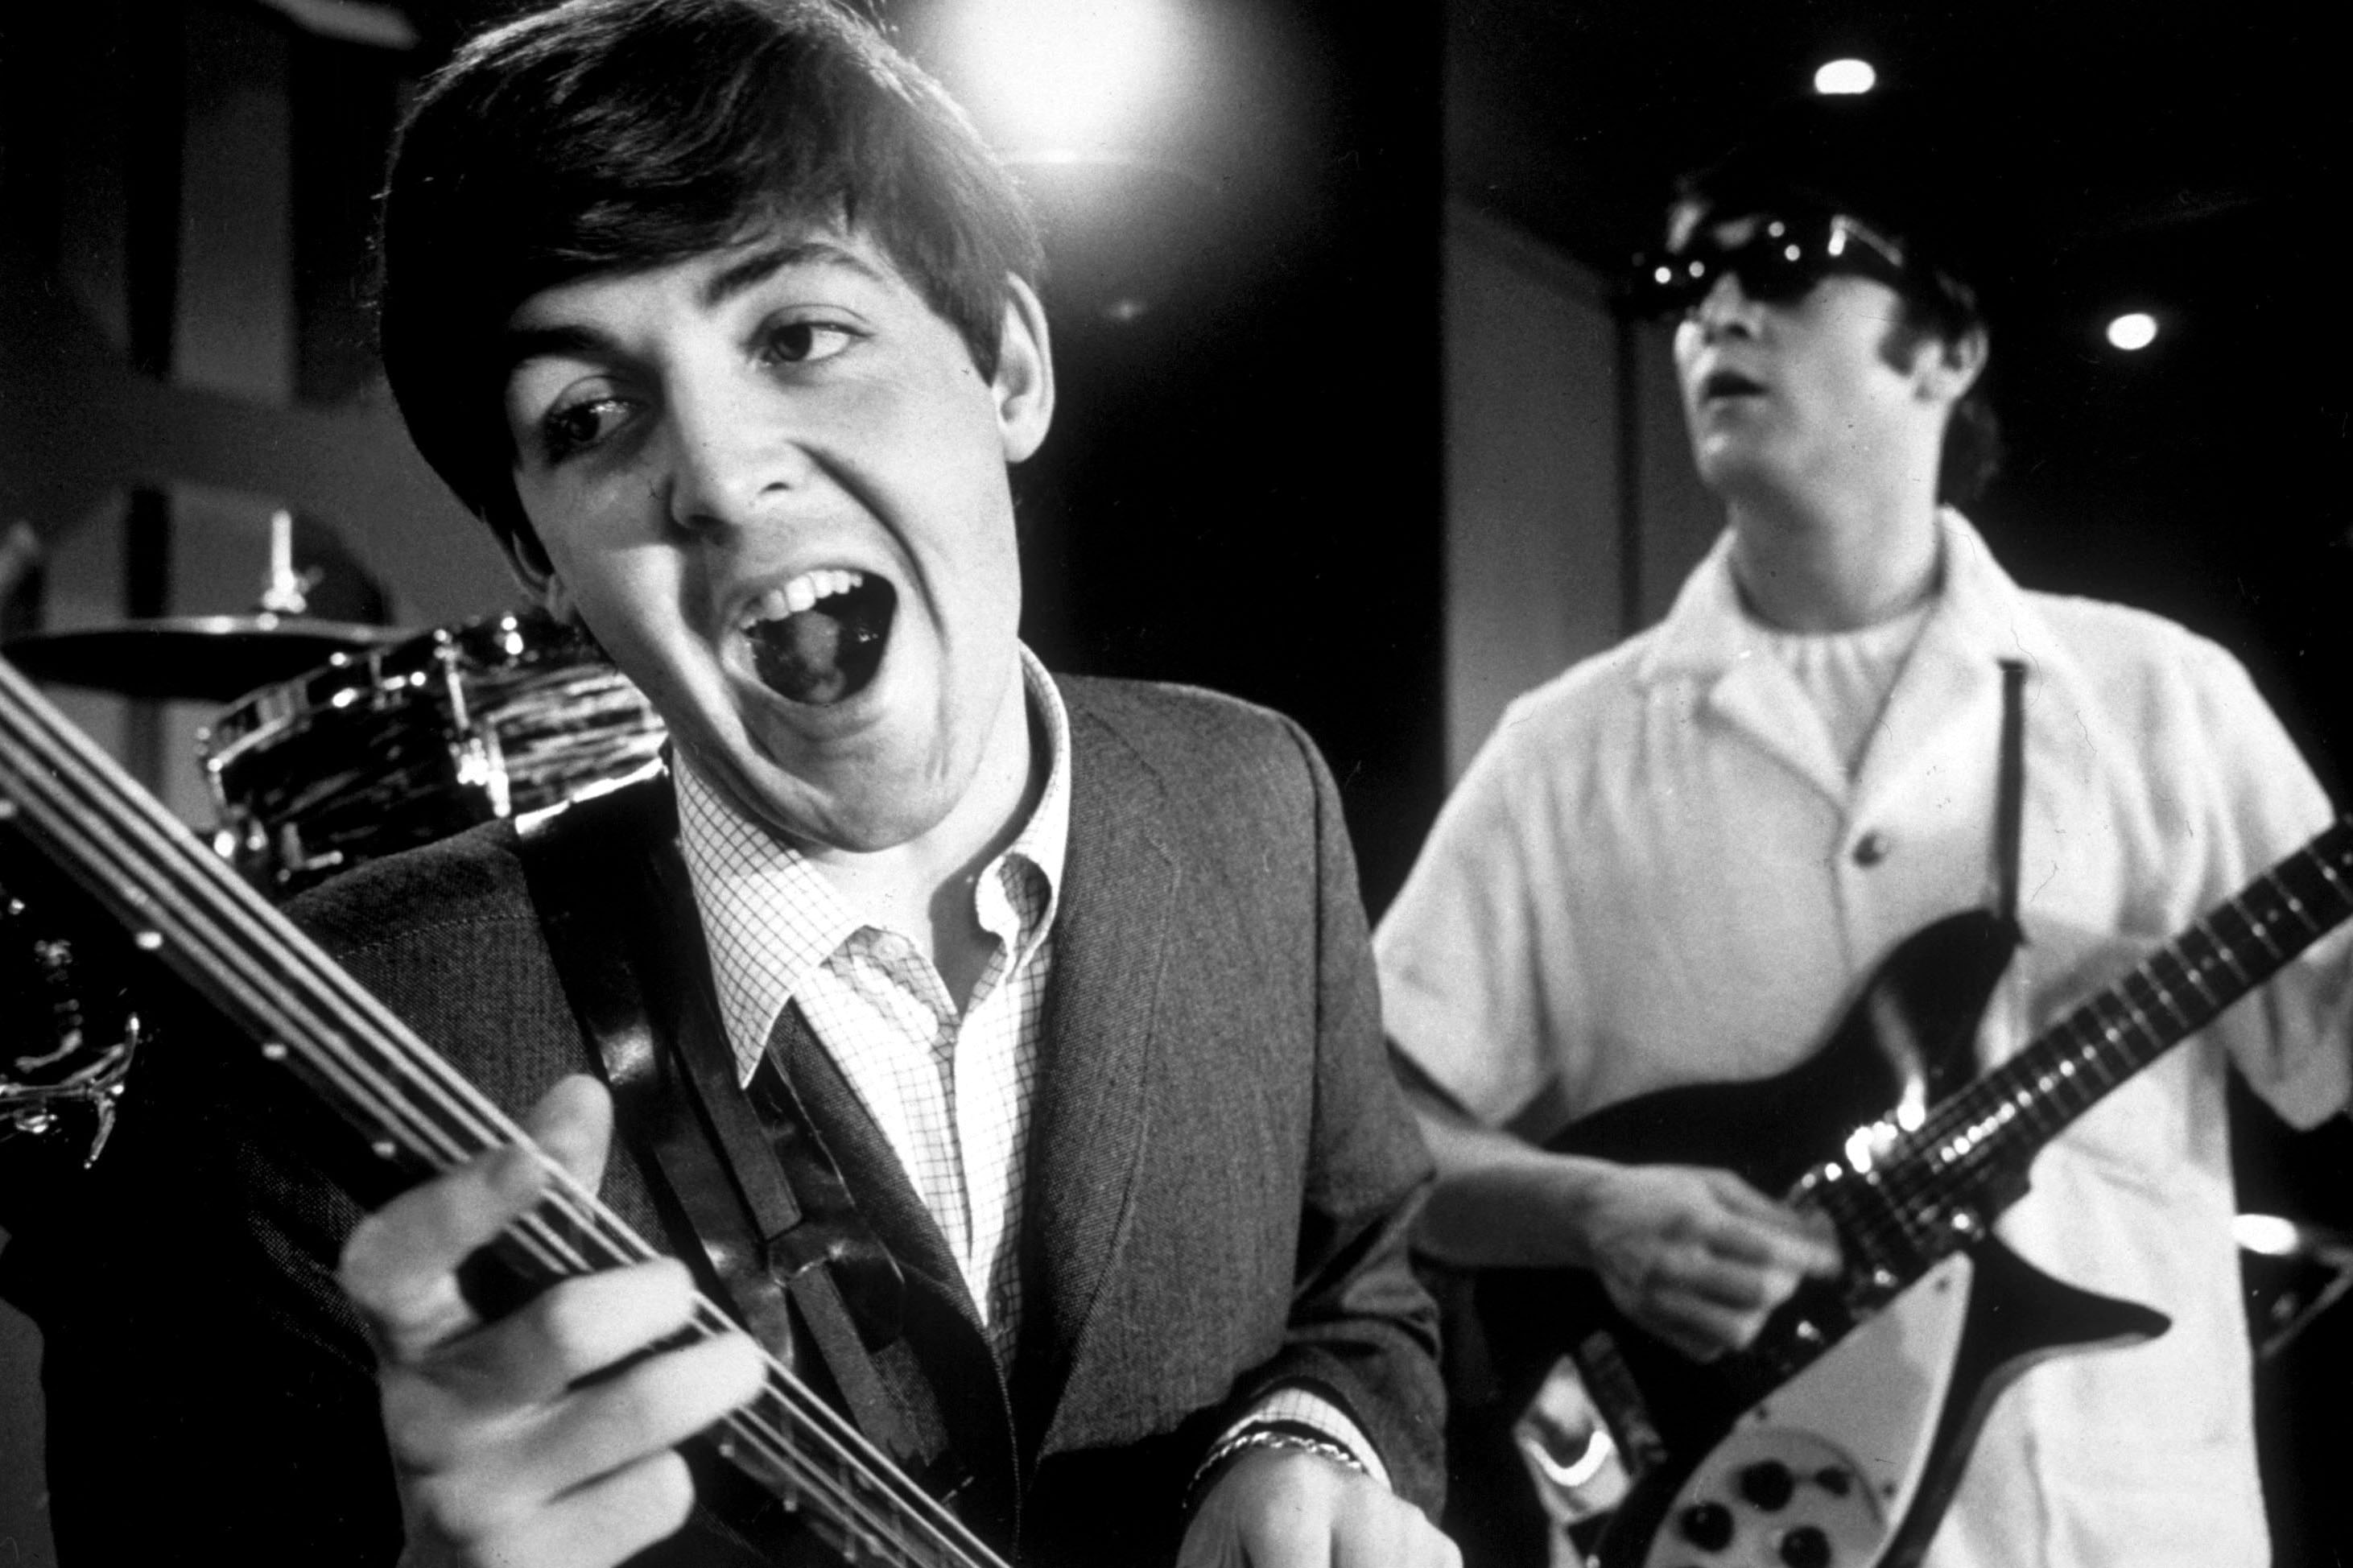 (L-R) Paul McCartney and John Lennon rehearsing on stage during the American tour of The Beatles, 1964.